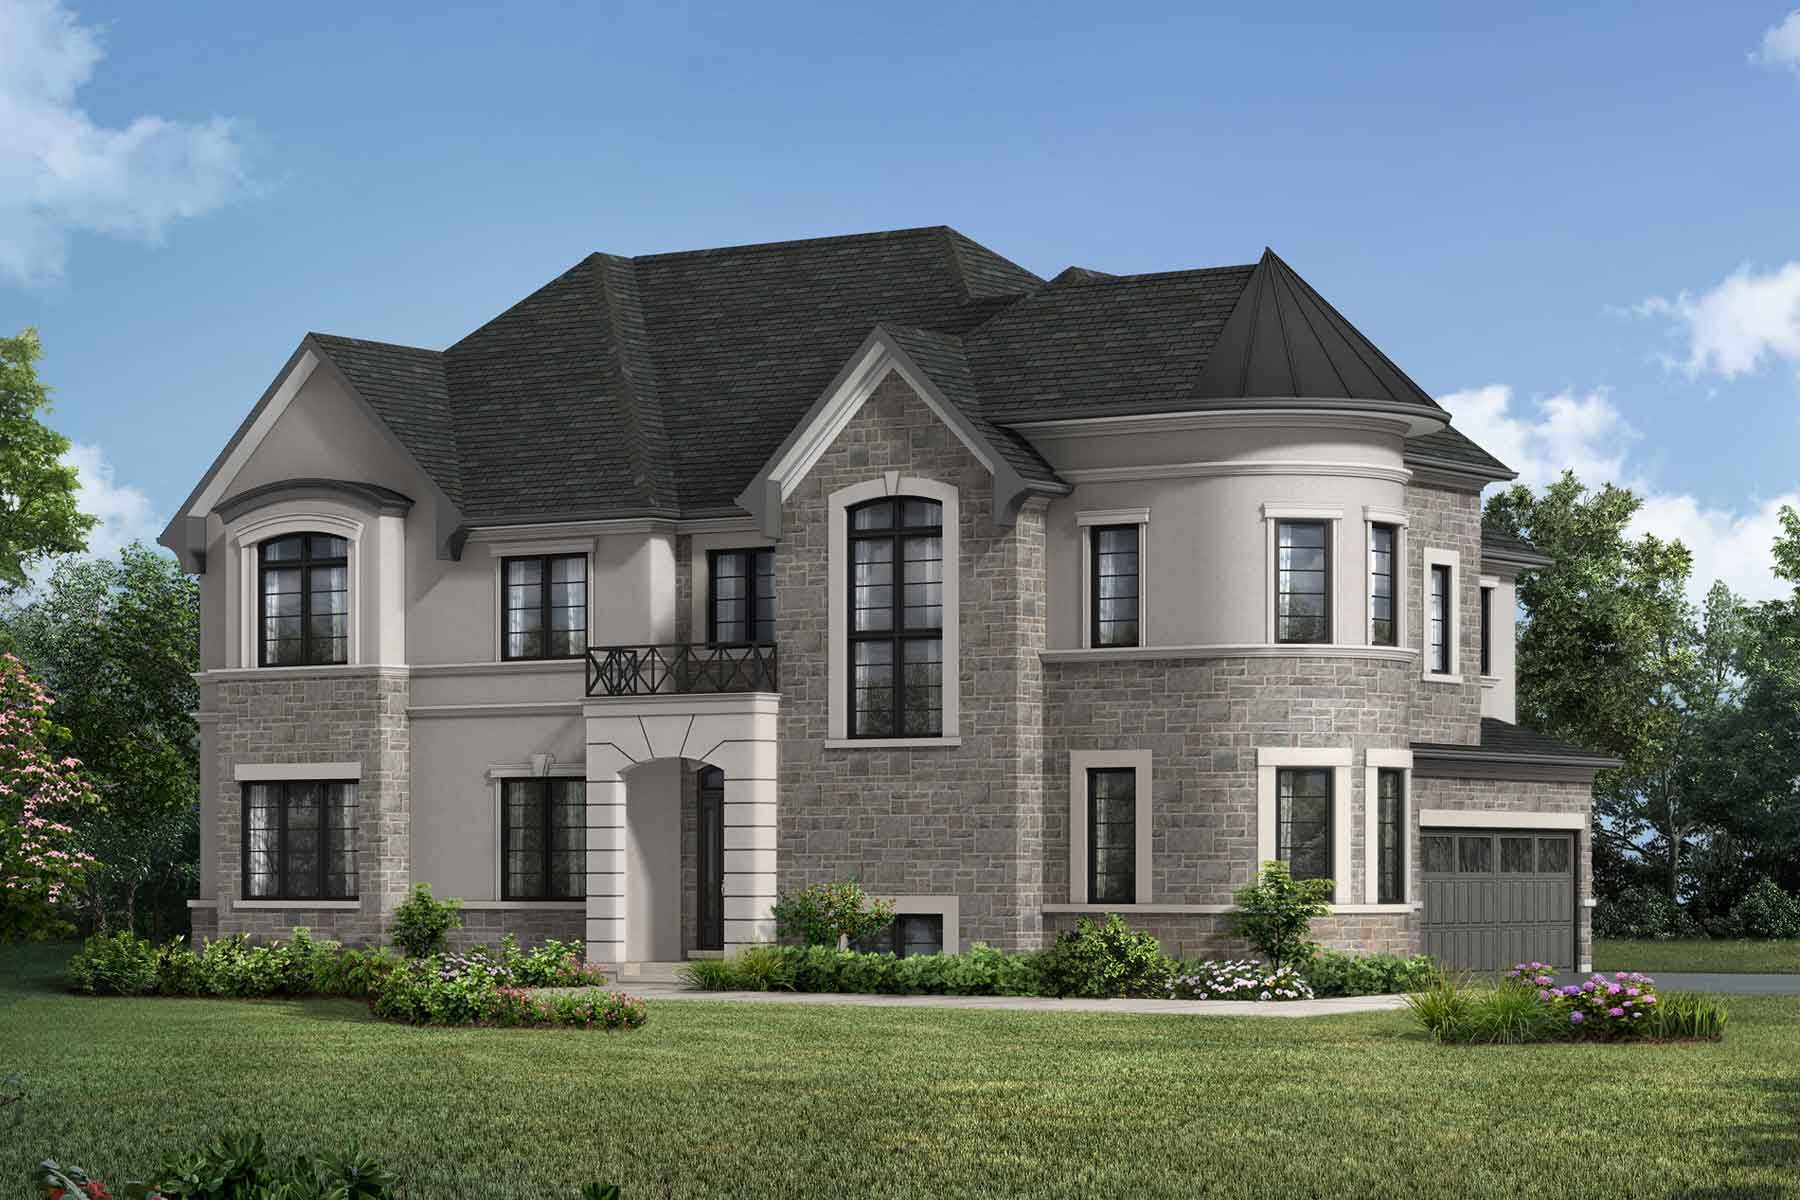 A French Chateau elevation style with a side main entrance, rounded front section and double car garage. 